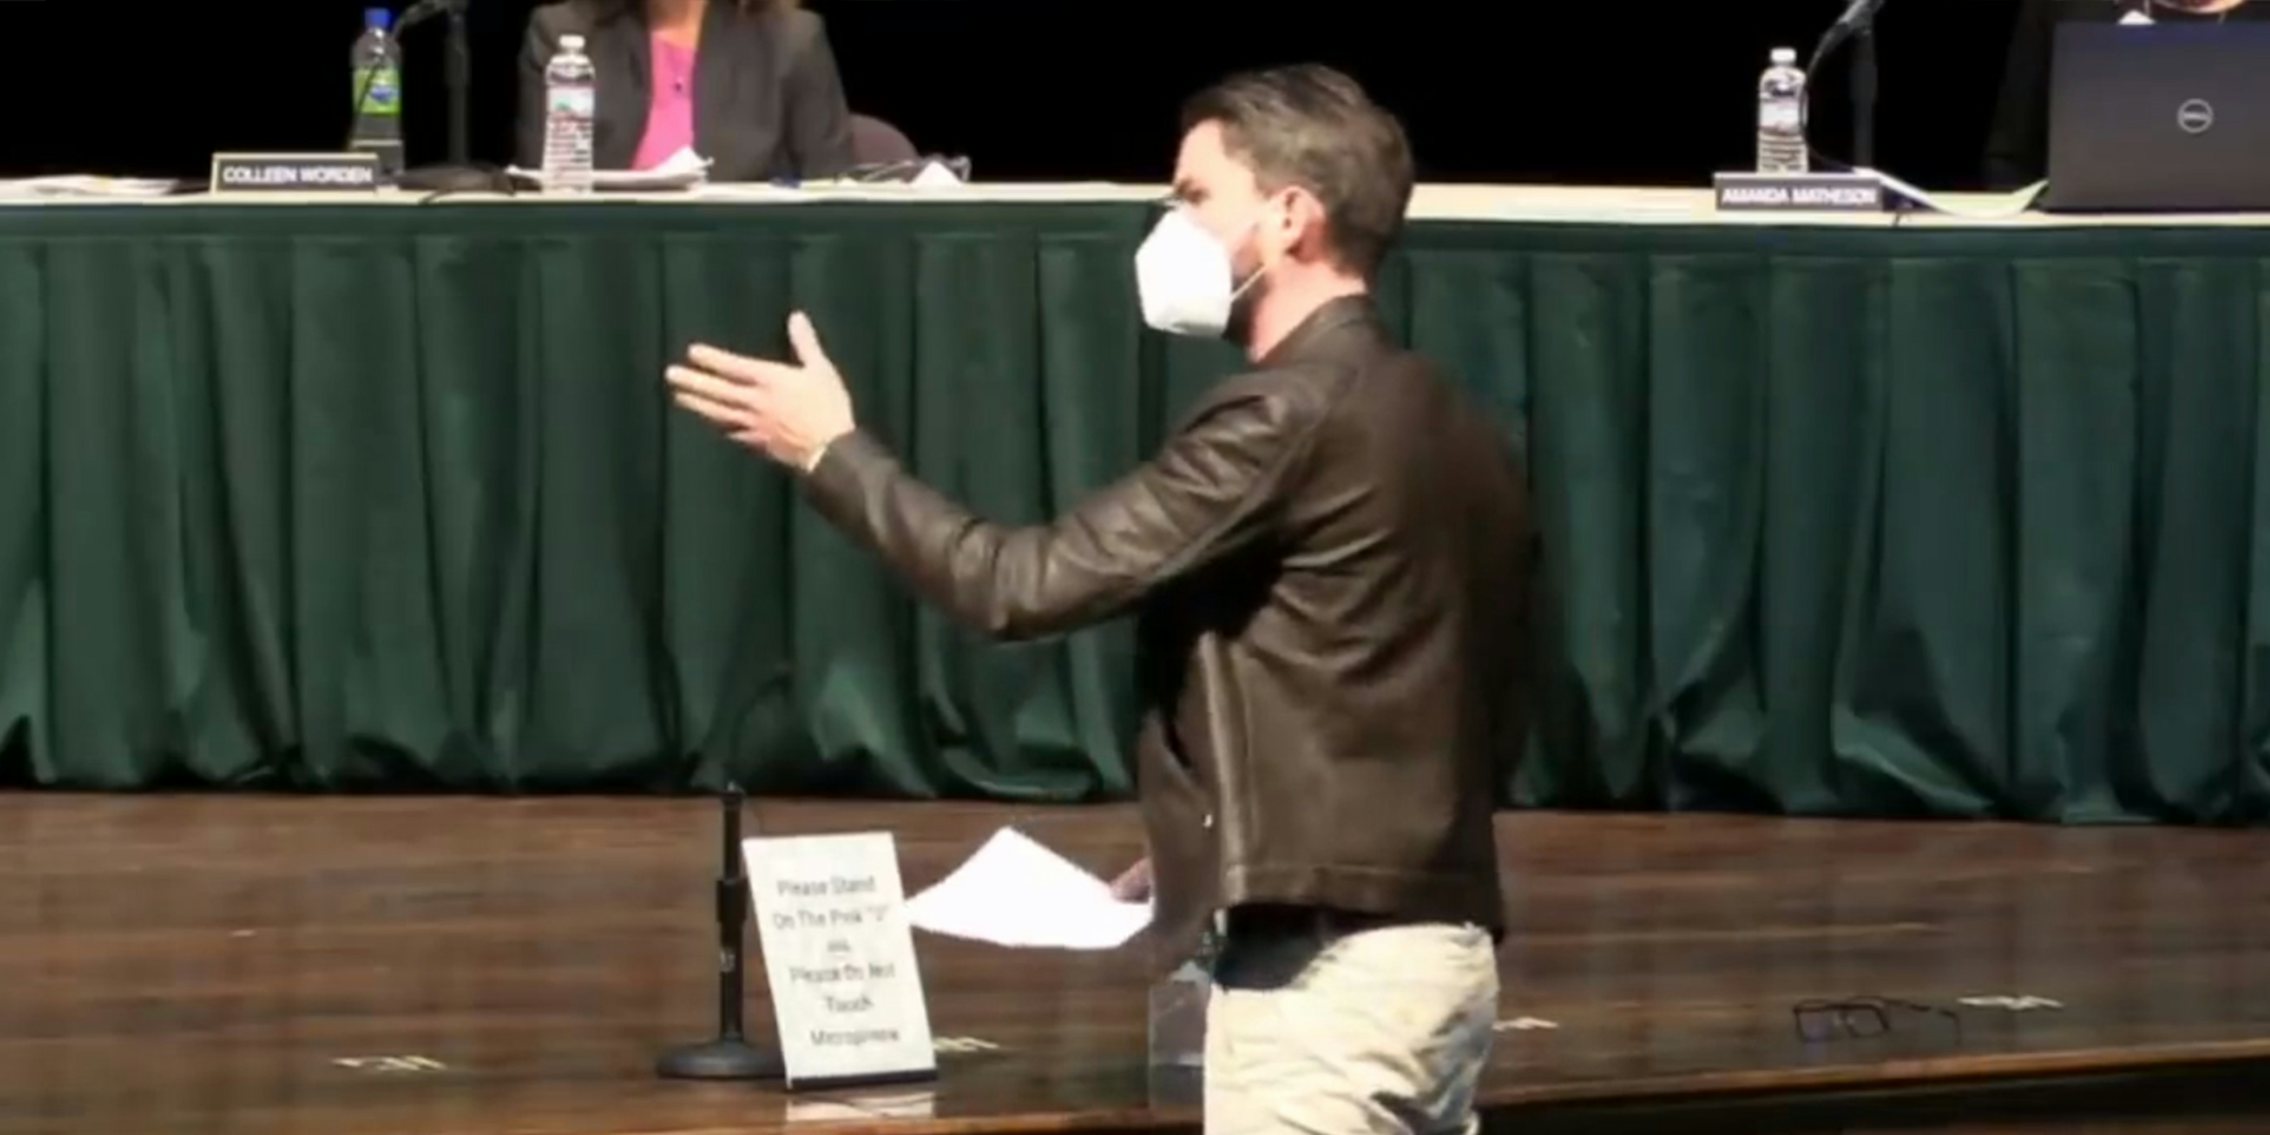 man in leather jacket and mask gestures to people sitting at table on stage